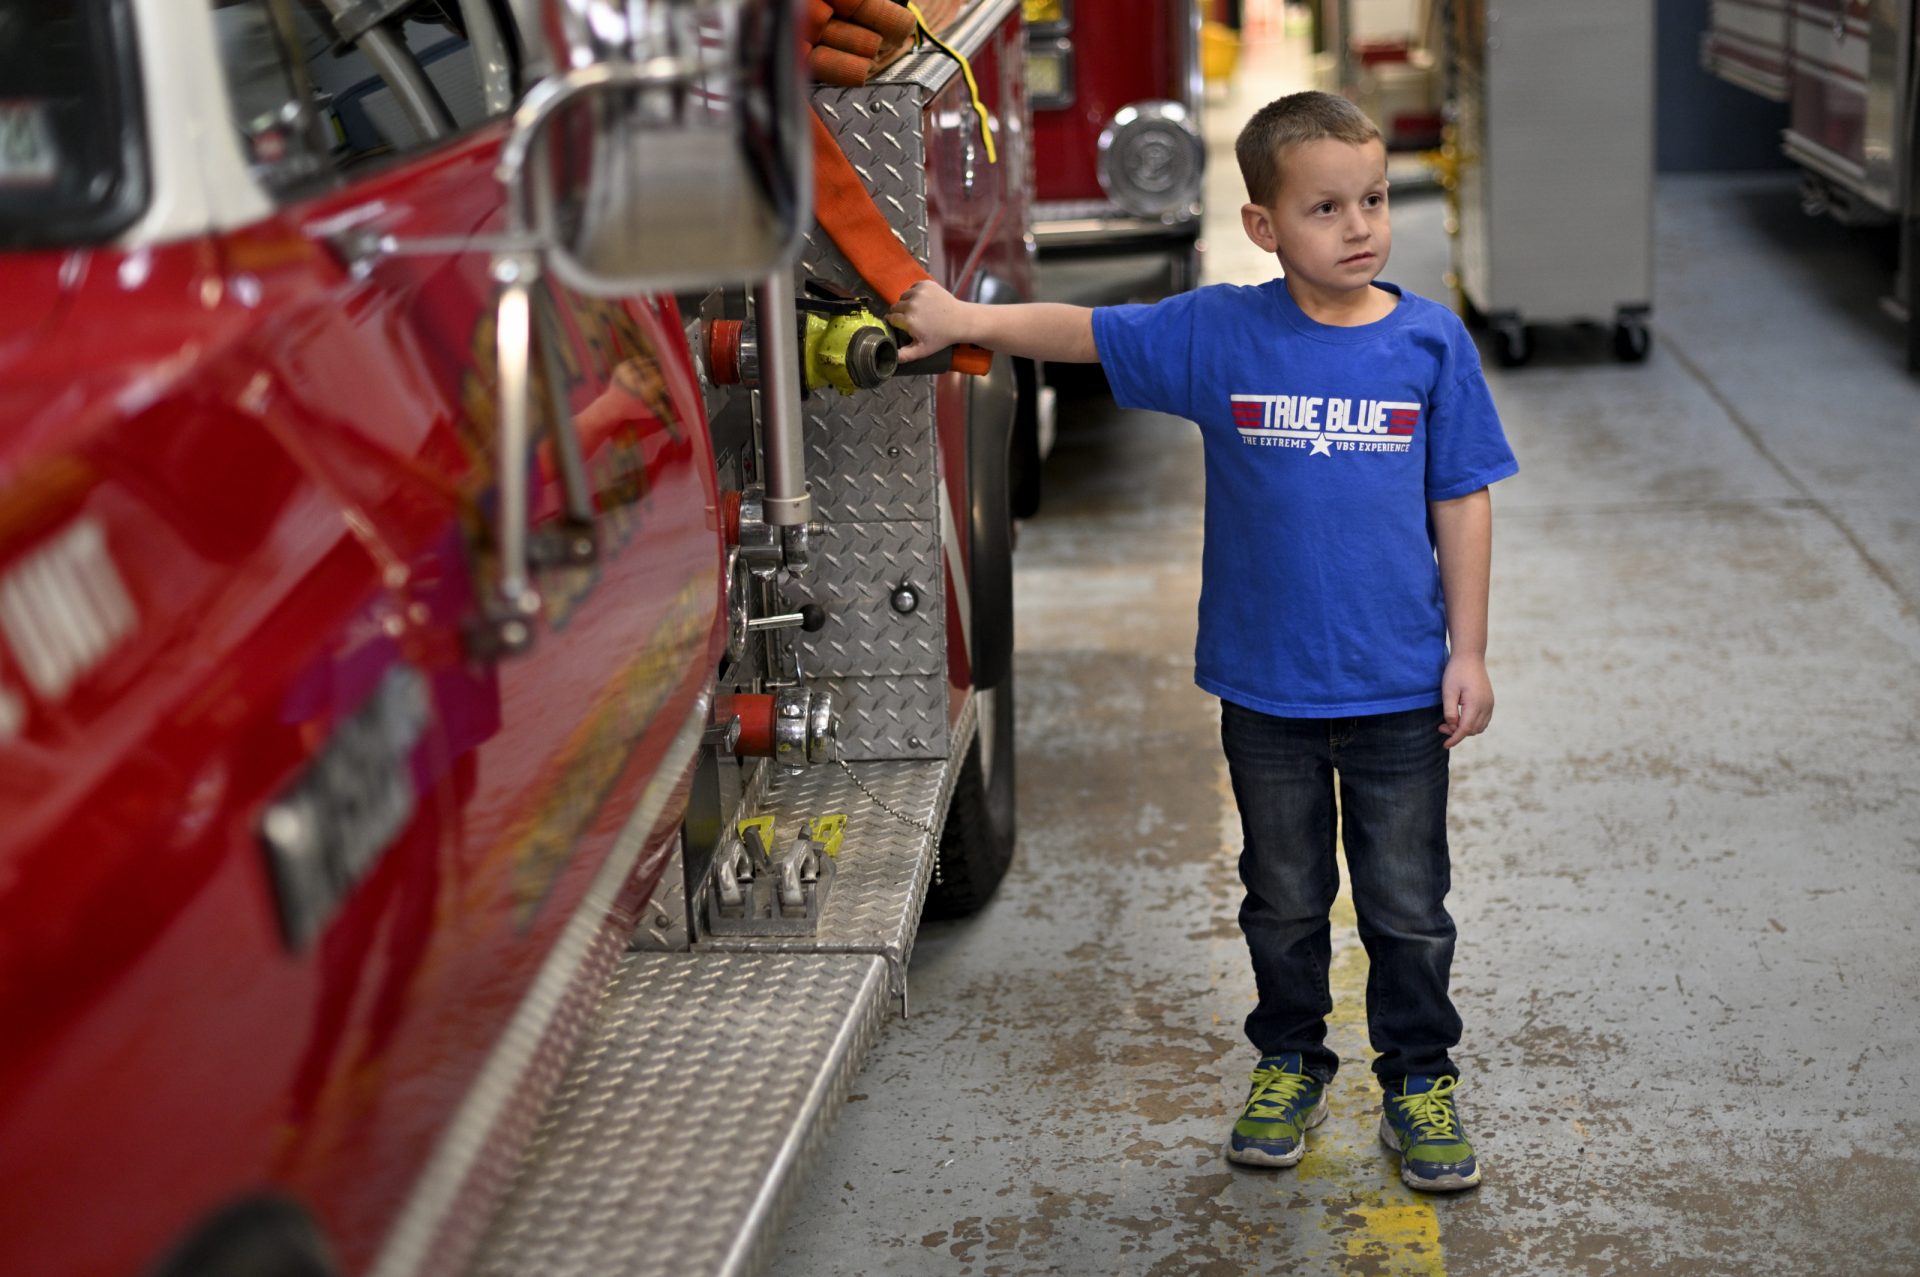 Tyler Donnatti, 6, son of the local Fire Chief, stands next to the brush truck of Rainbow Hose Co., in Schuylkill Haven, PA, on December 15, 2019.